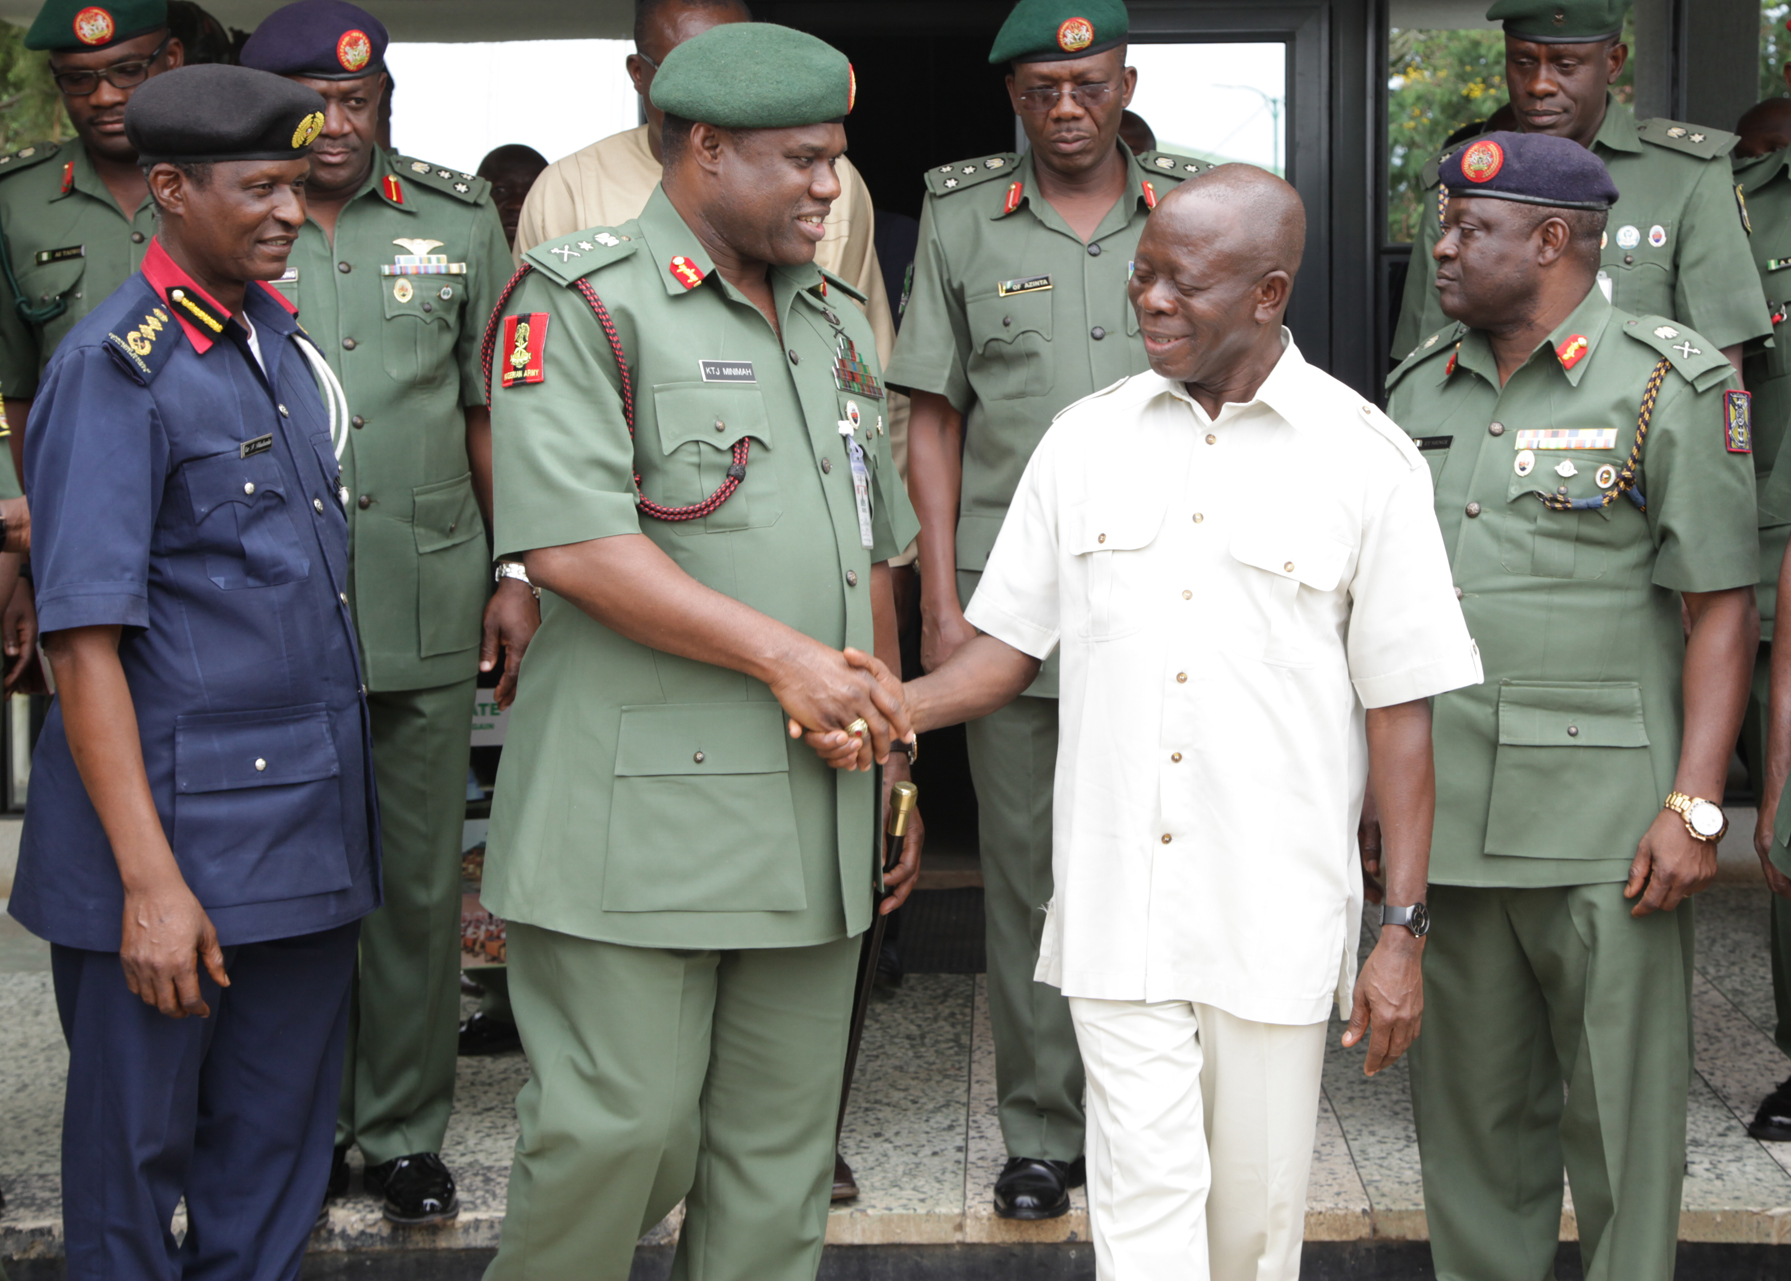 From left: Commanadant-General, Nigerian Security and Civil Defence Corps, Dr Ade Abolurin, Chief of Srmy Staff, Lt-General Kenneth Minimah, Governor Adams Oshiomhole of Edo State and Commandant, Nigerian Army School of Supply and Transport, Maj-General E.T Nienge during a courtesy visit of the Army Chief to the Governor in his office, last Friday.